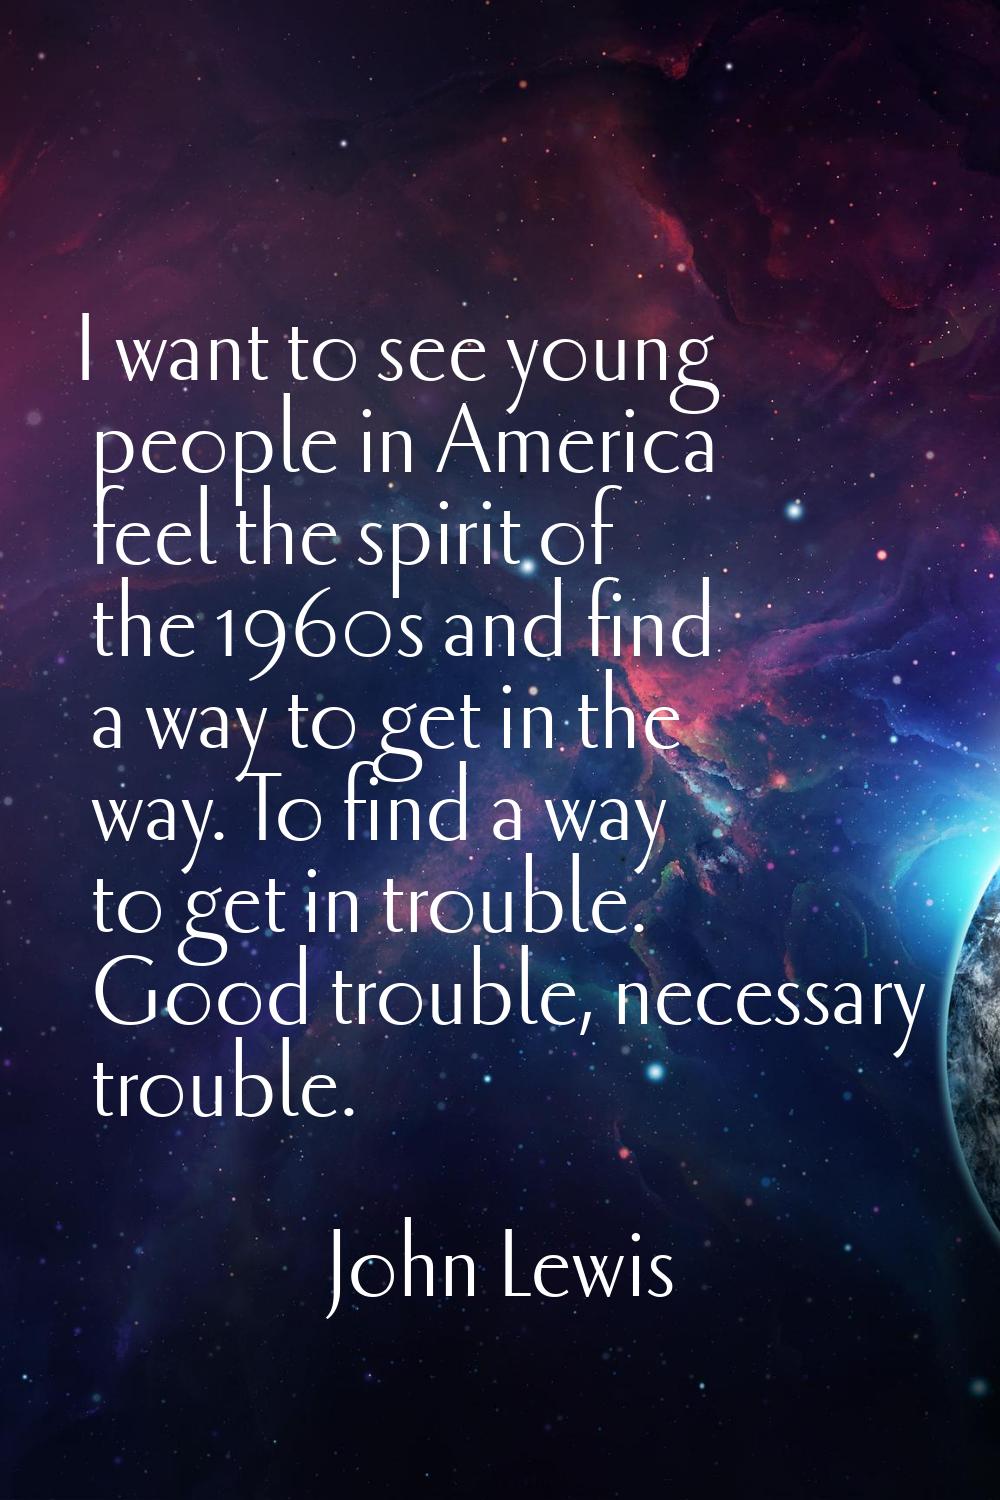 I want to see young people in America feel the spirit of the 1960s and find a way to get in the way